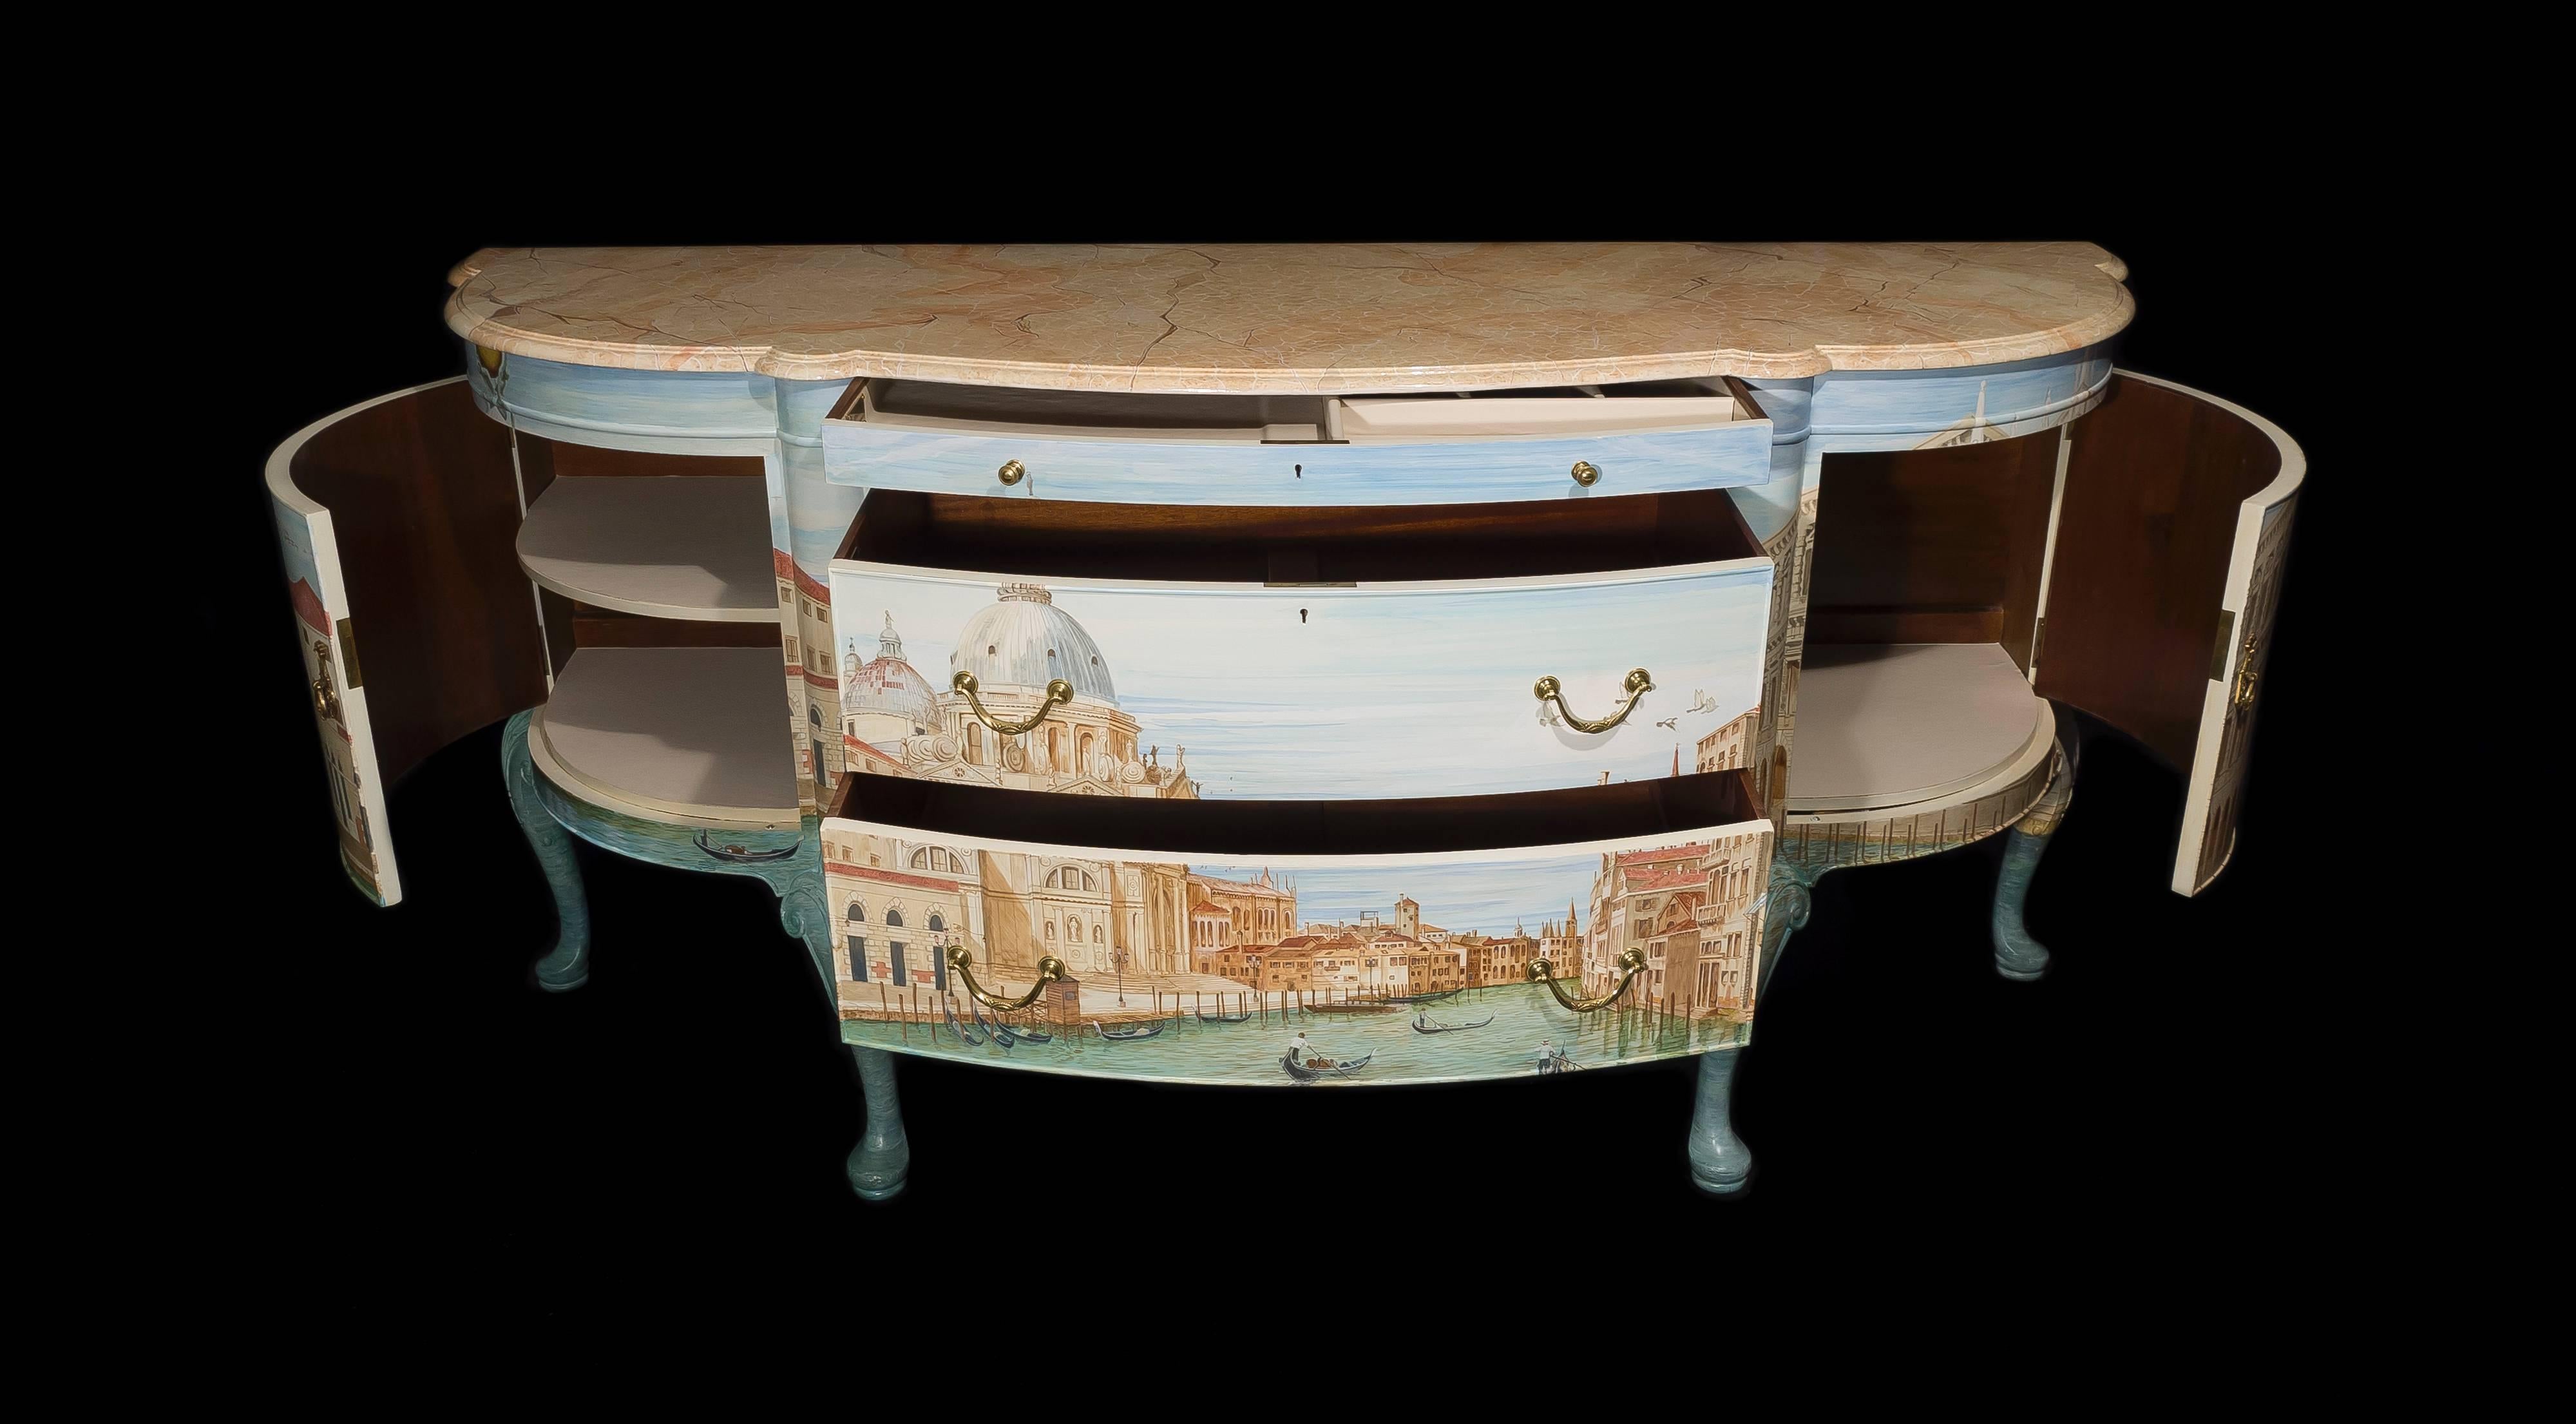 1932 Waring and Gillow British Sideboard Hand-Painted by Kensa Design For Sale 3